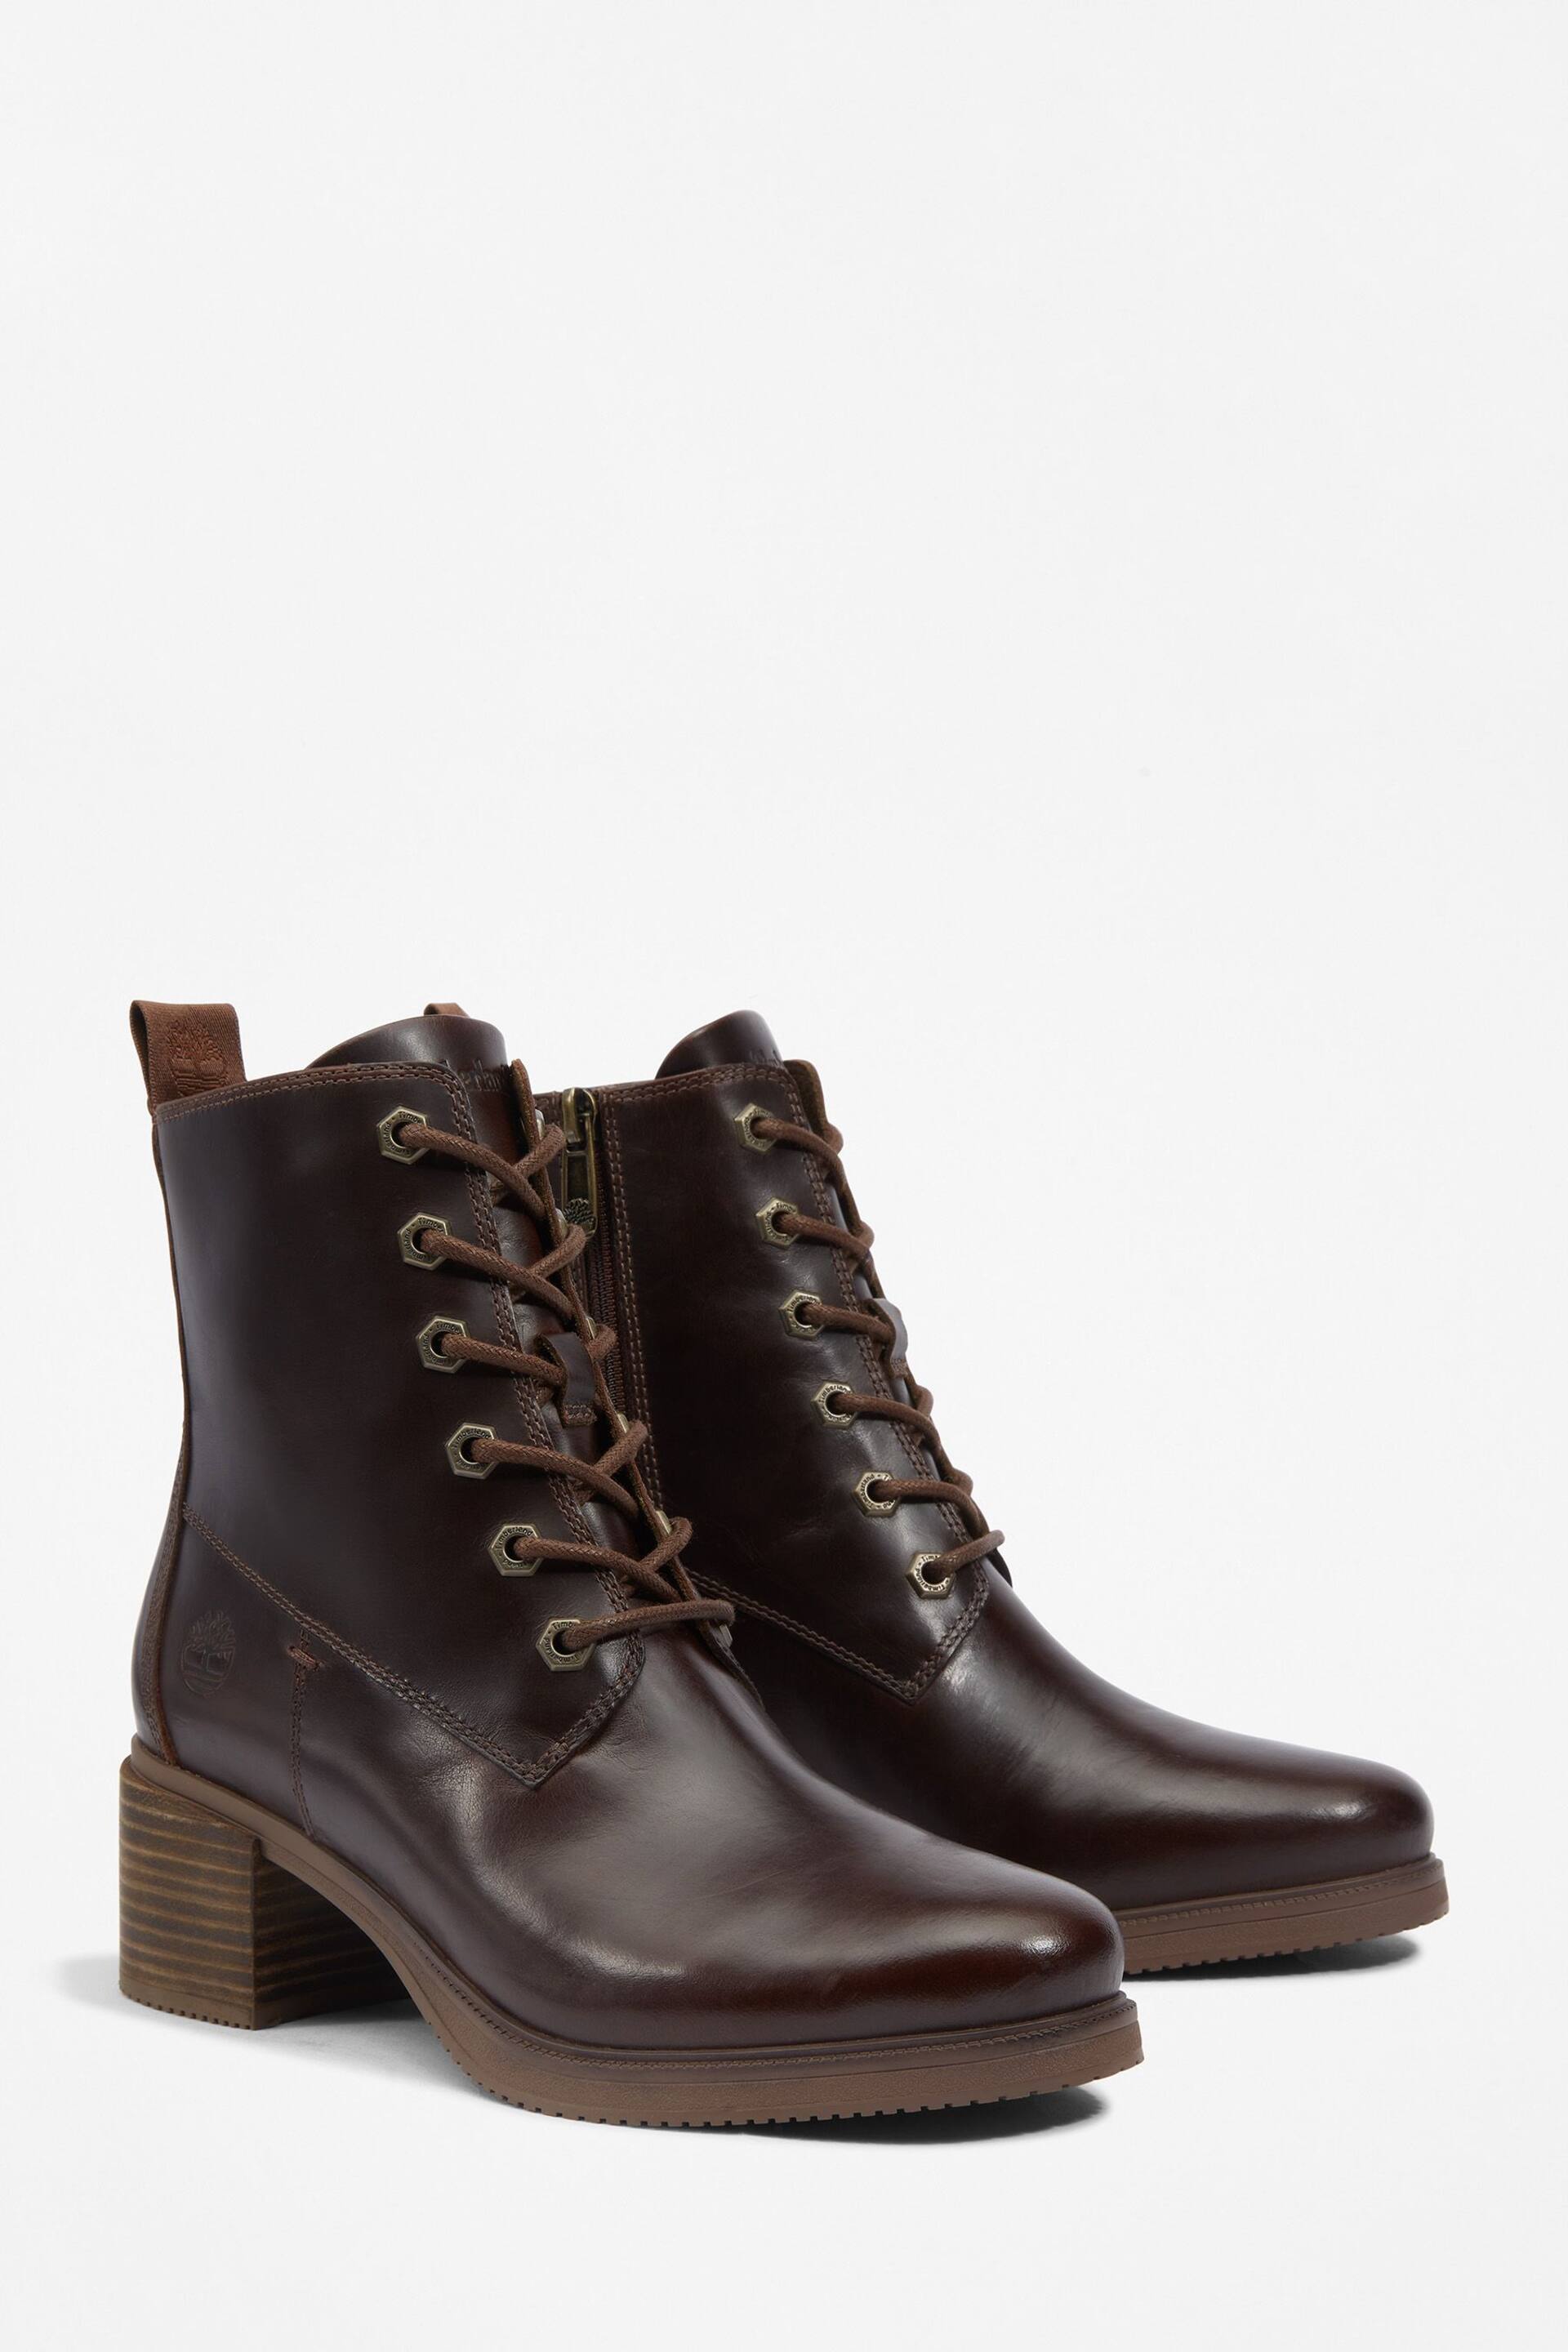 Timberland Dalston Vibe Zip Boots - Image 2 of 4